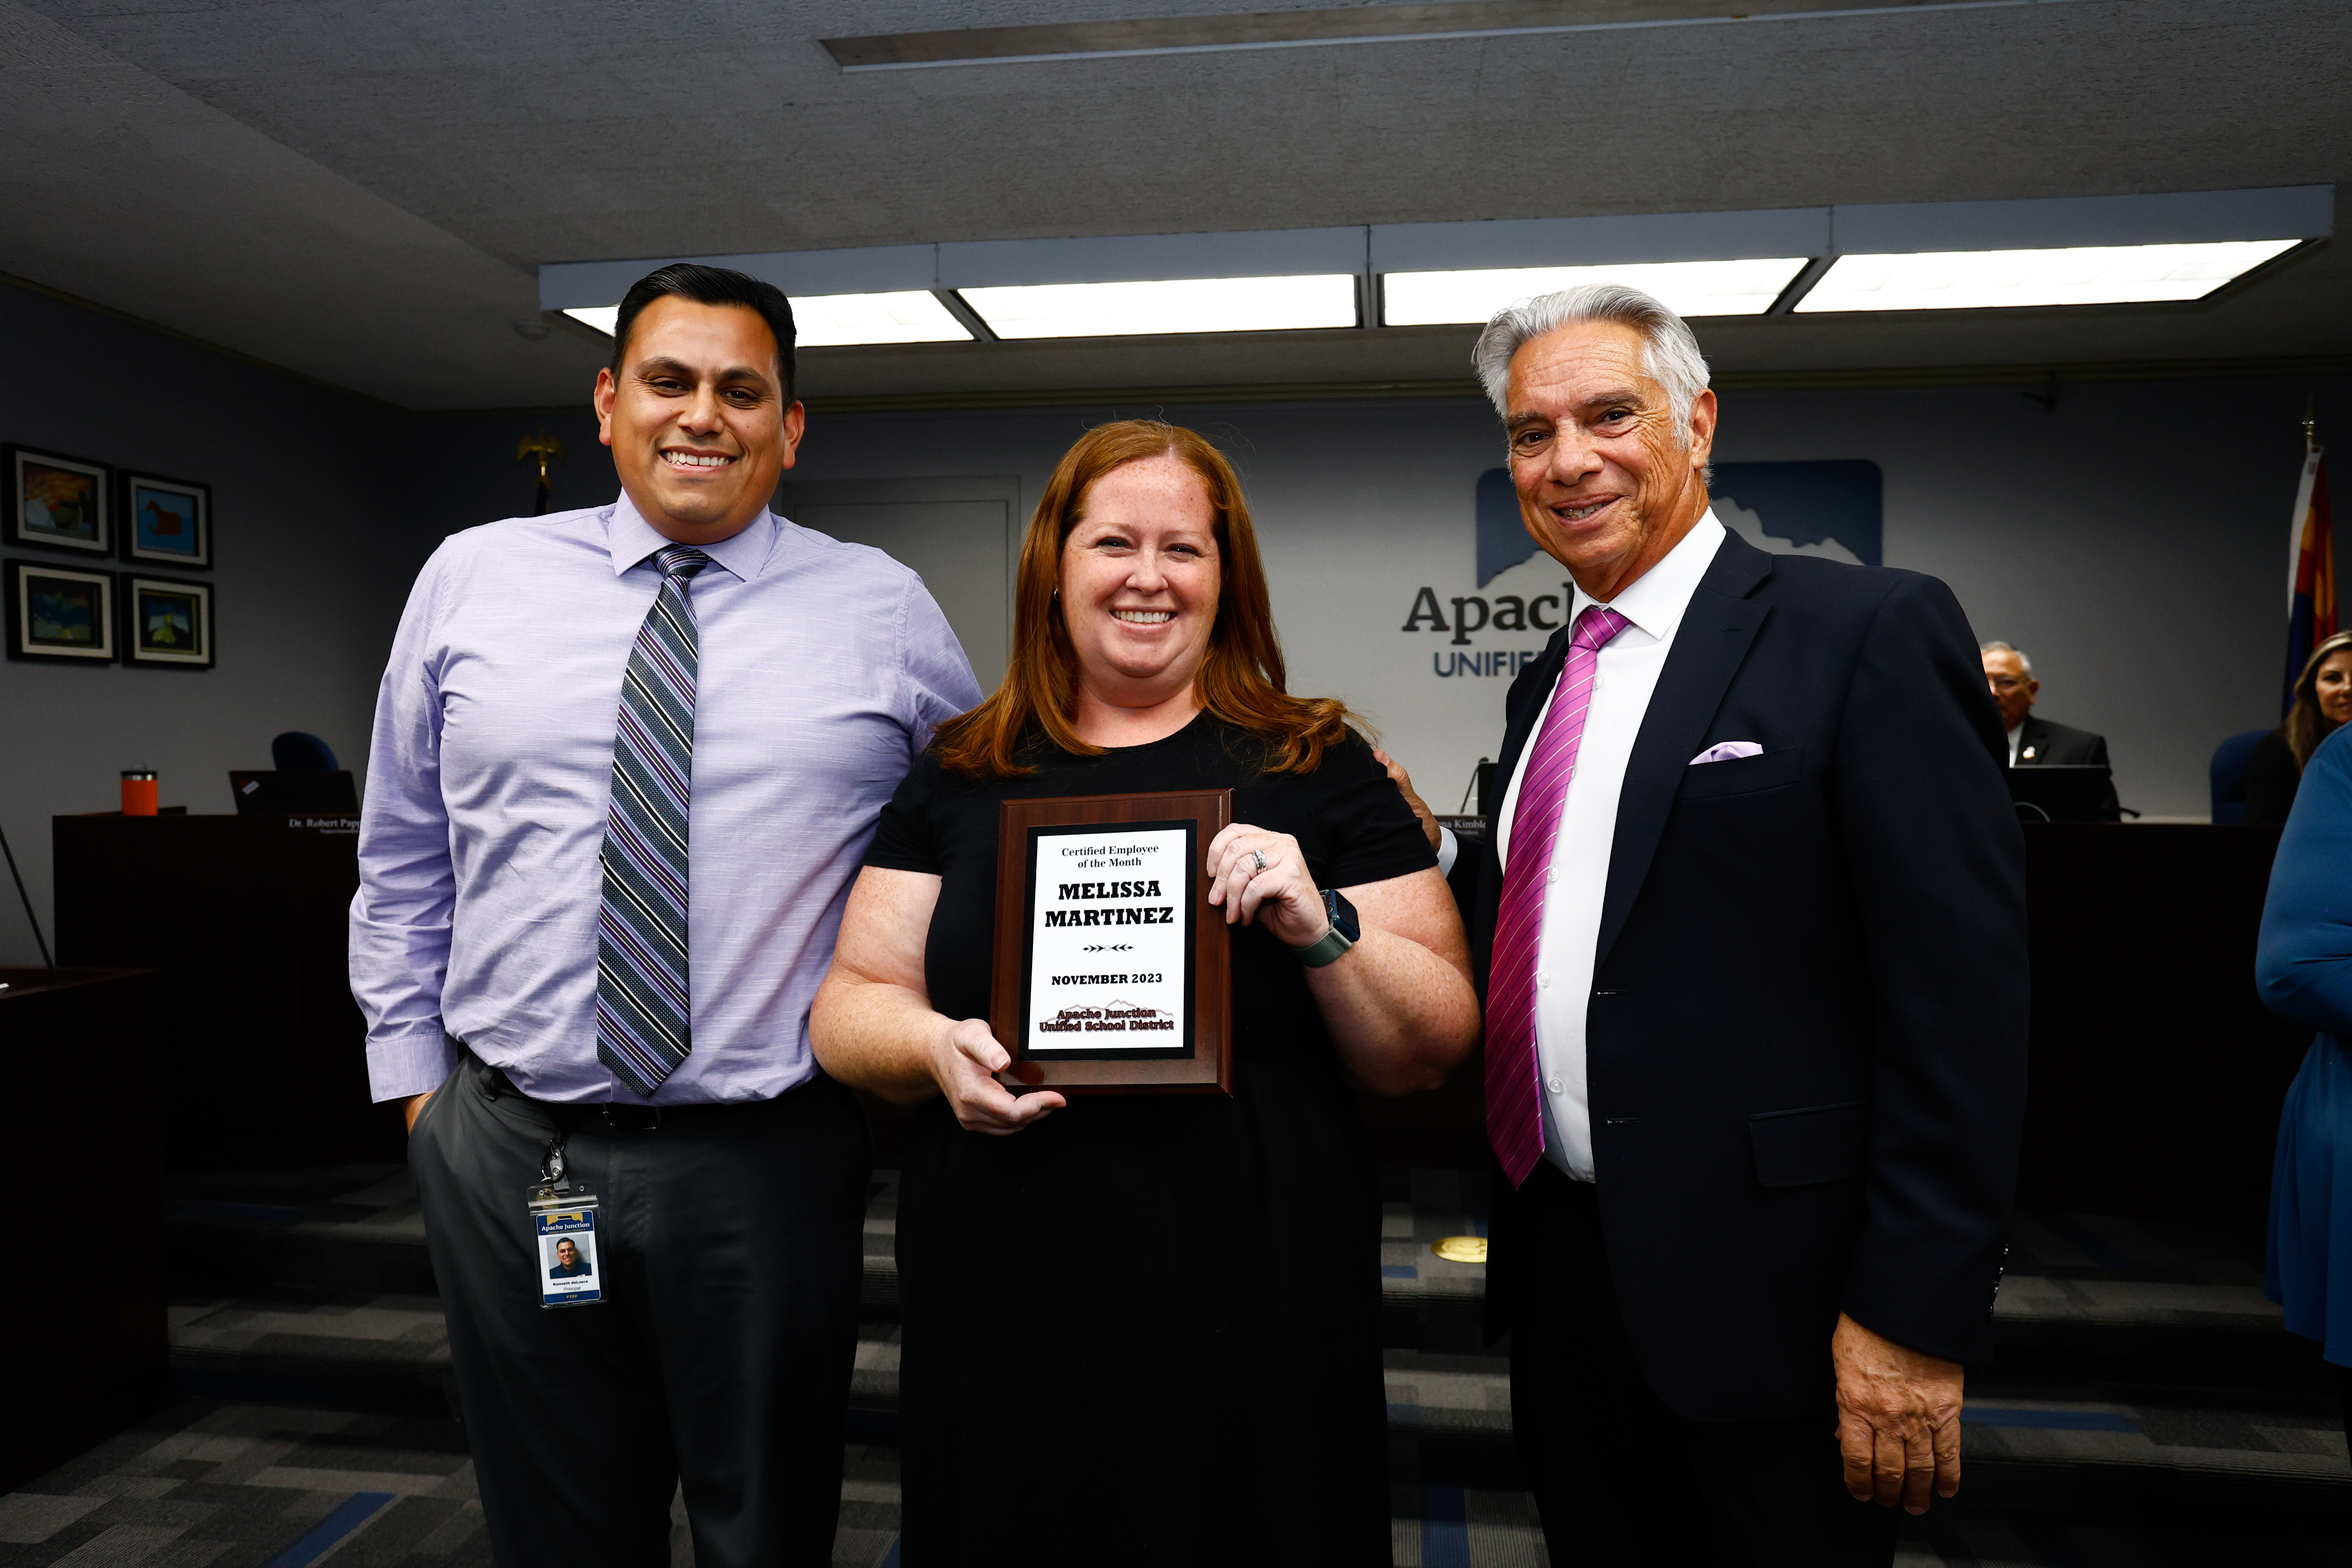 Melissa Martinez, November Certified Employee of the Month